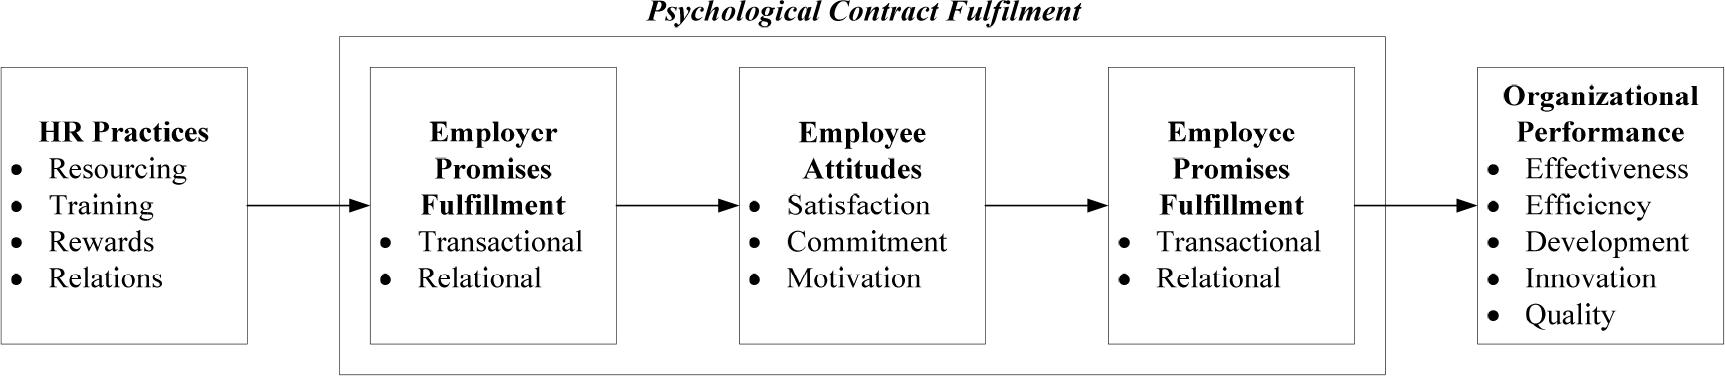 transactional psychological contract